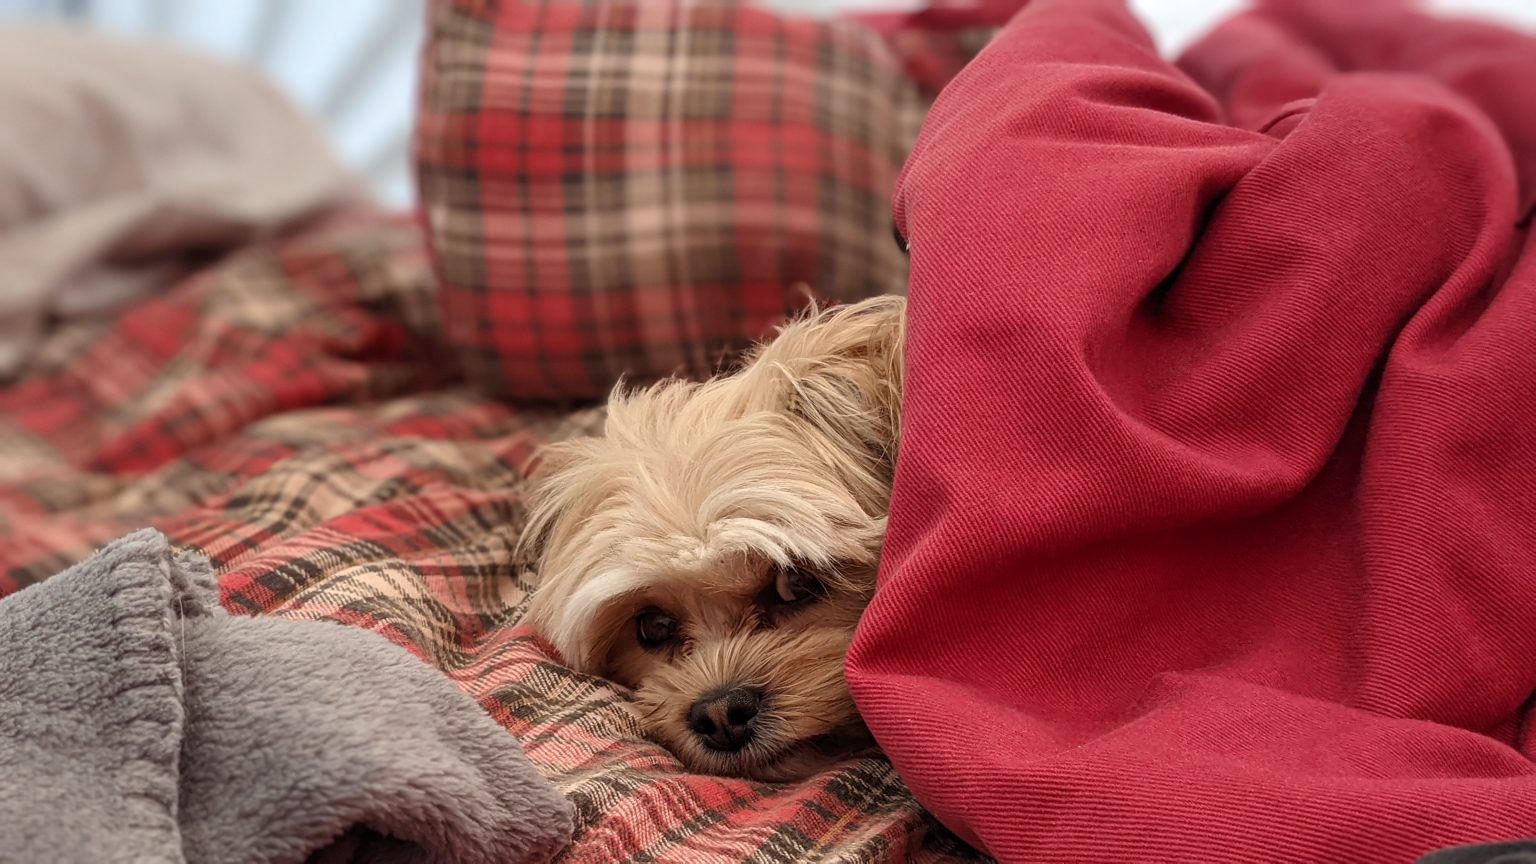 A little dog poking her head out and waking up in the morning in her sleeping bag.